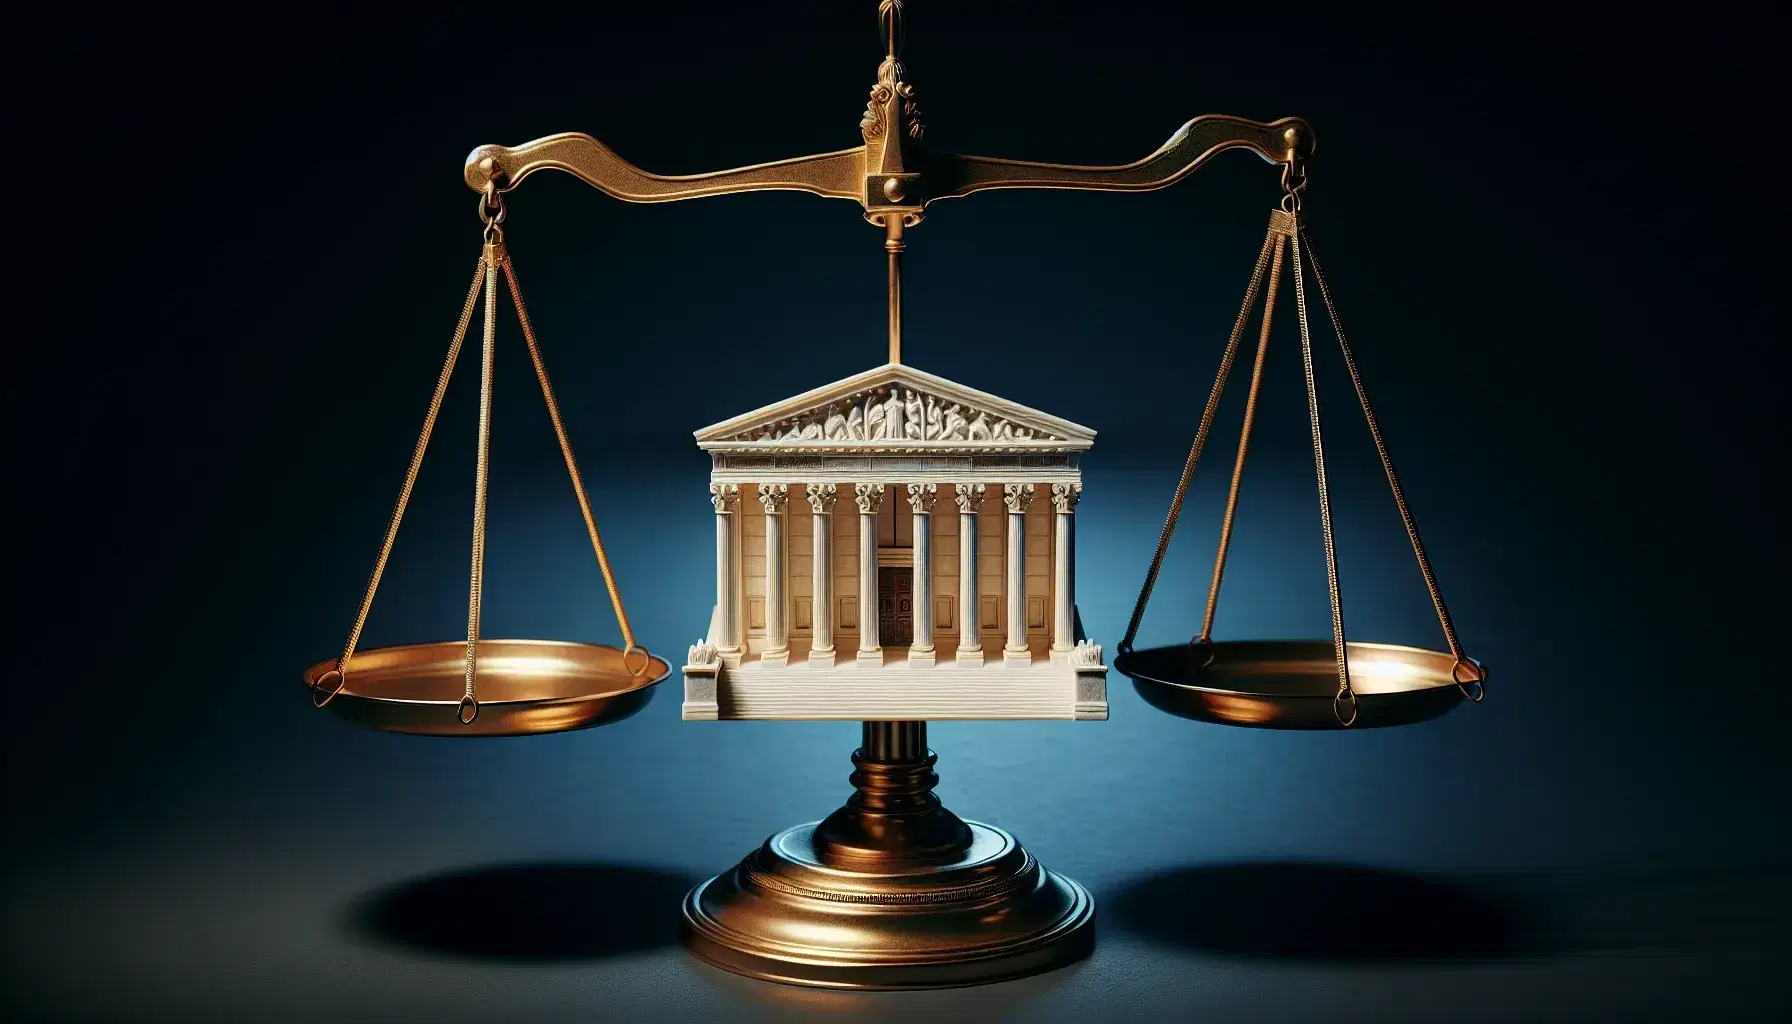 Balanced golden scale with equal-sized models of a classical government building and the US Supreme Court, set against a blue gradient background.